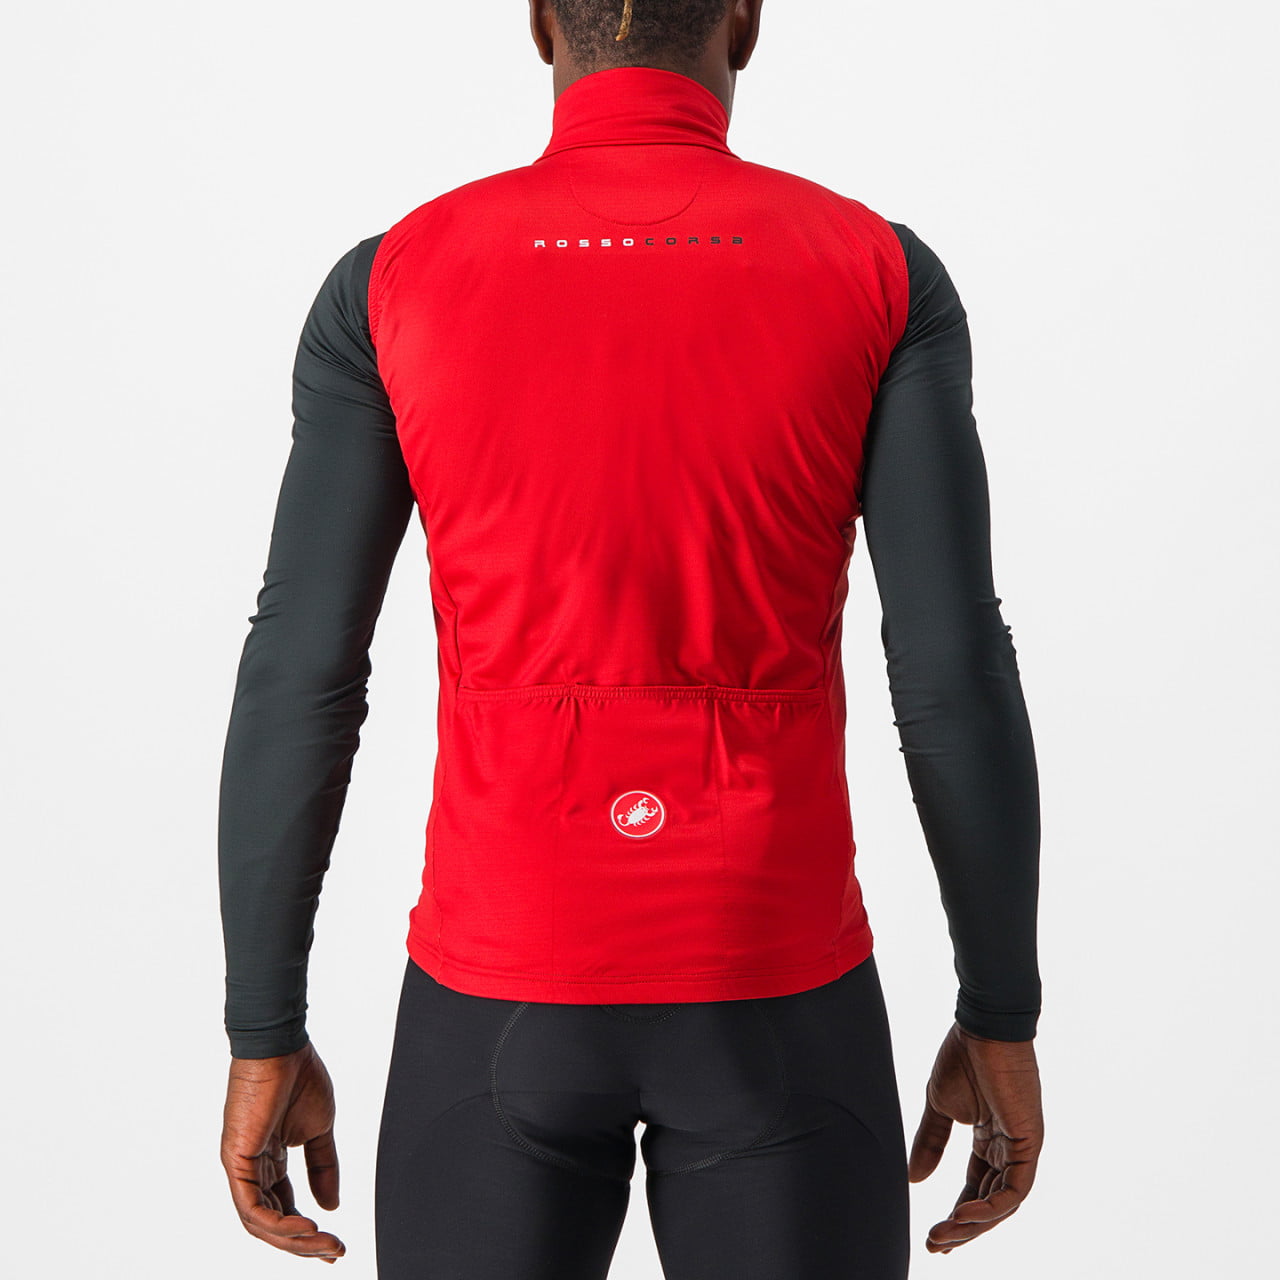 Thermovest Thermal Pro Mid